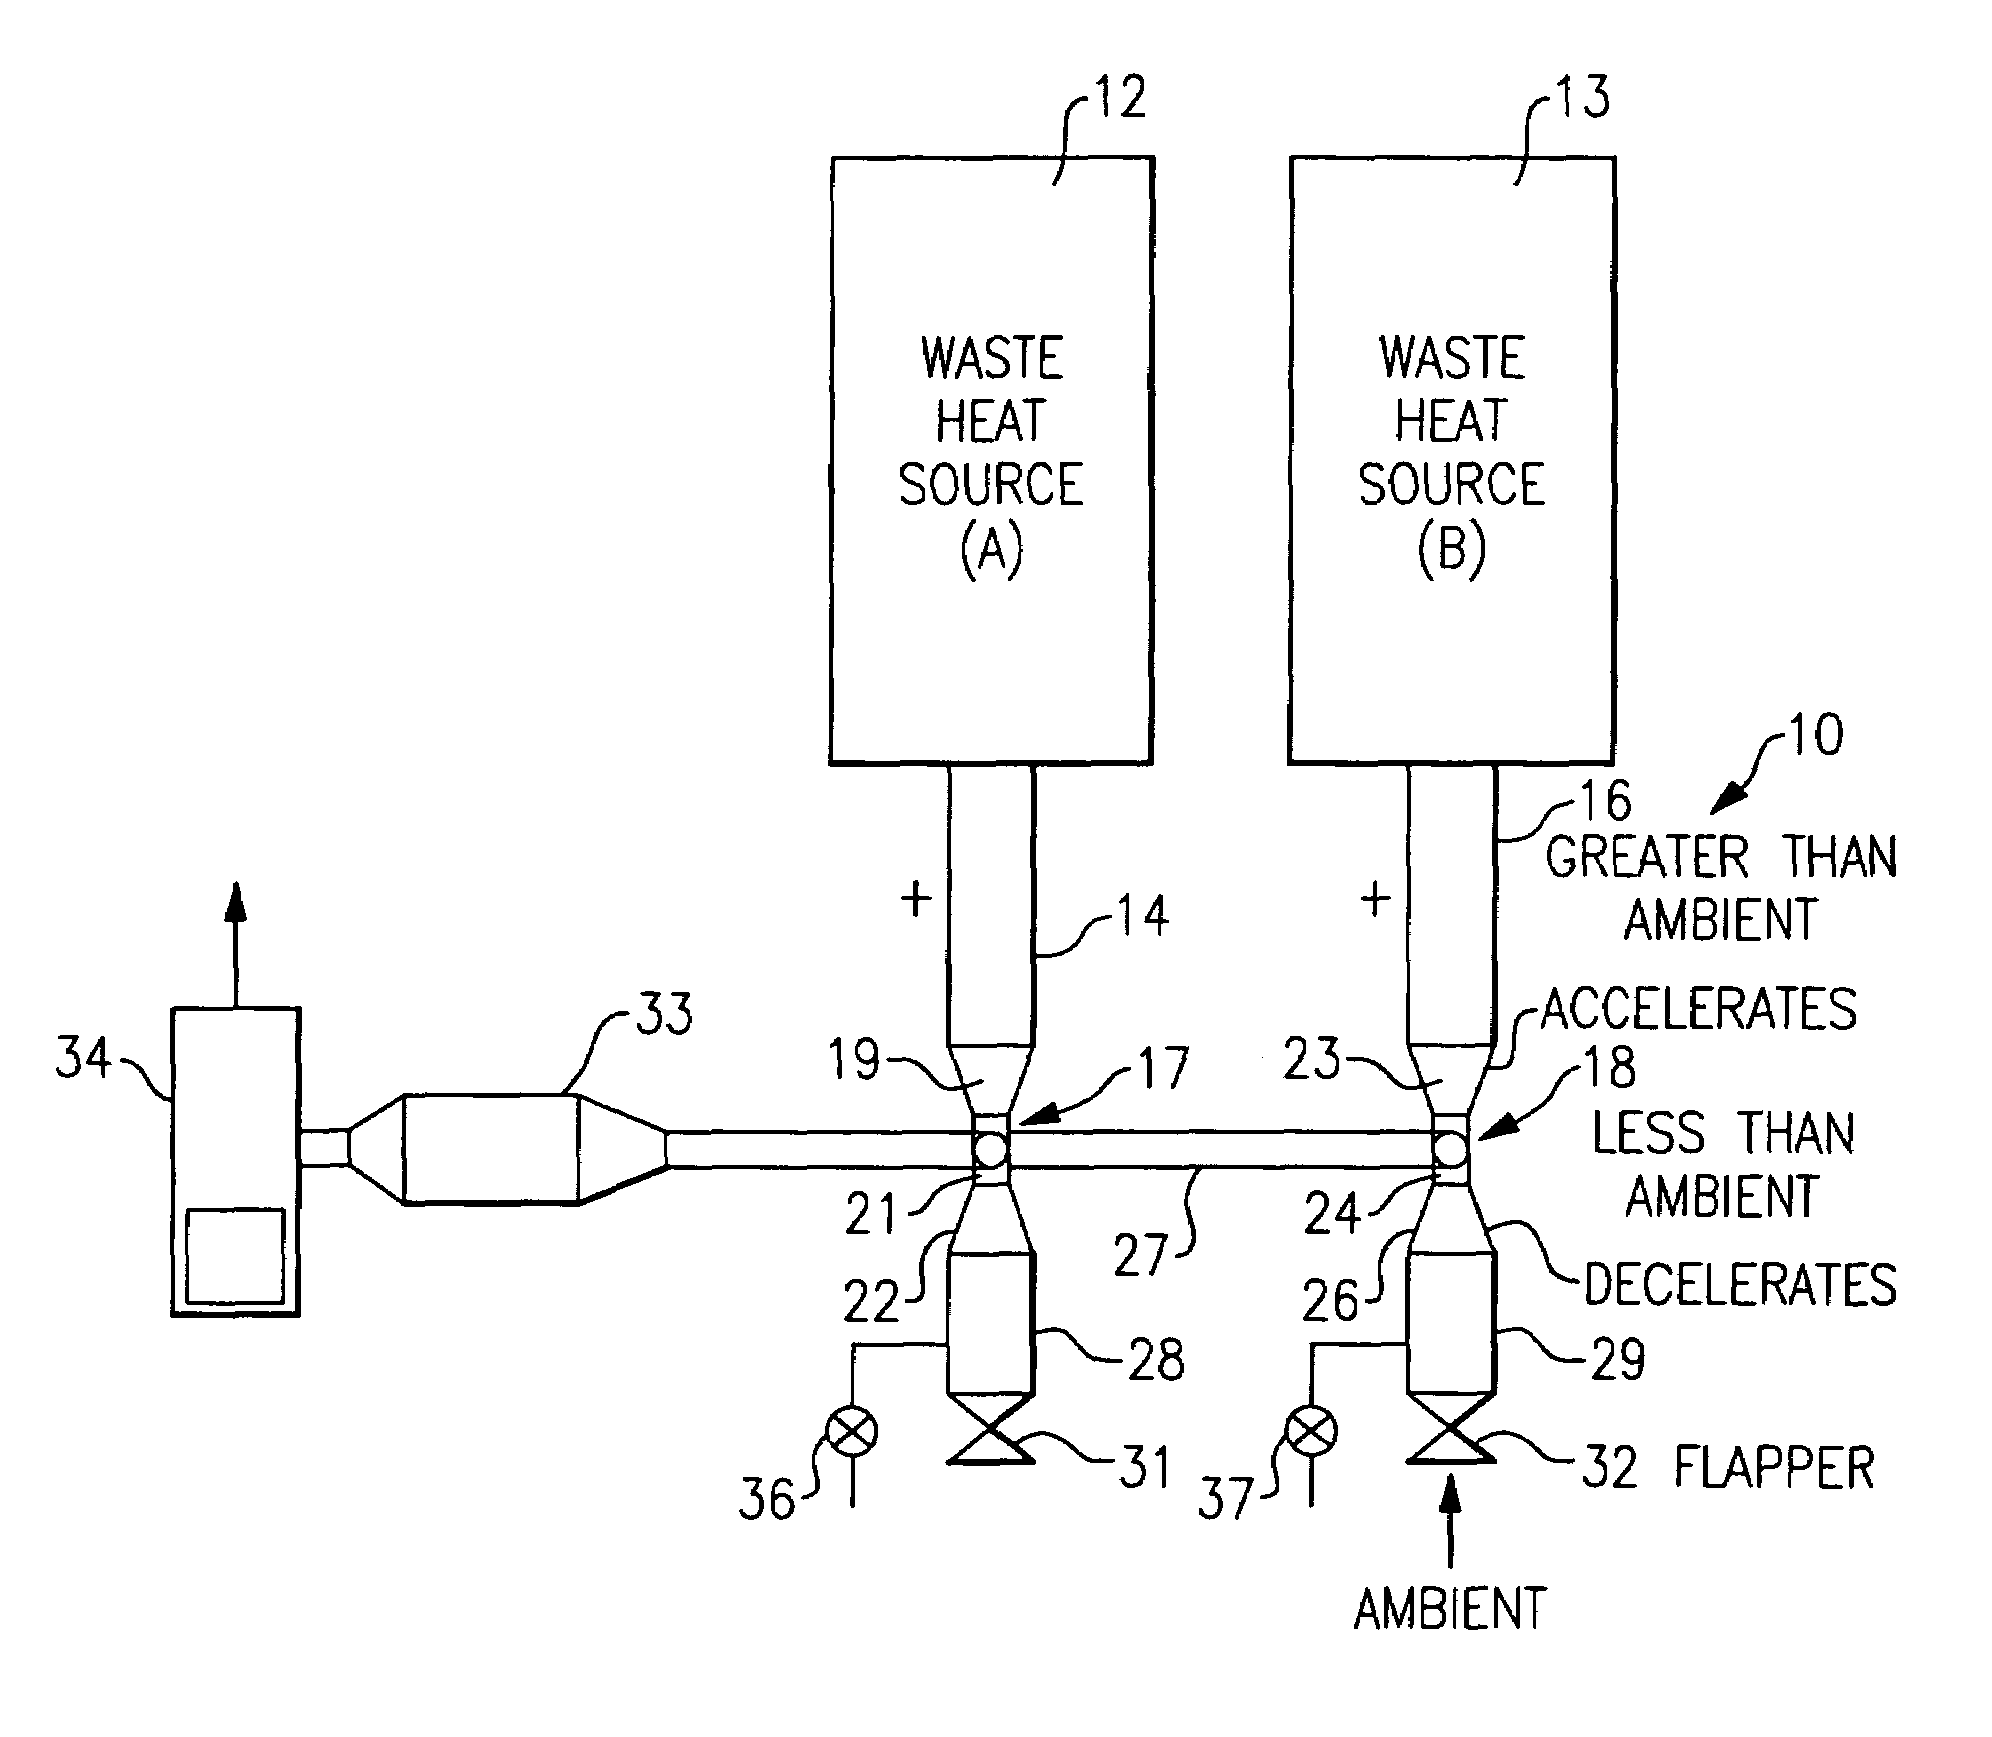 Apparatus for extracting exhaust heat from waste heat sources while preventing backflow and corrosion